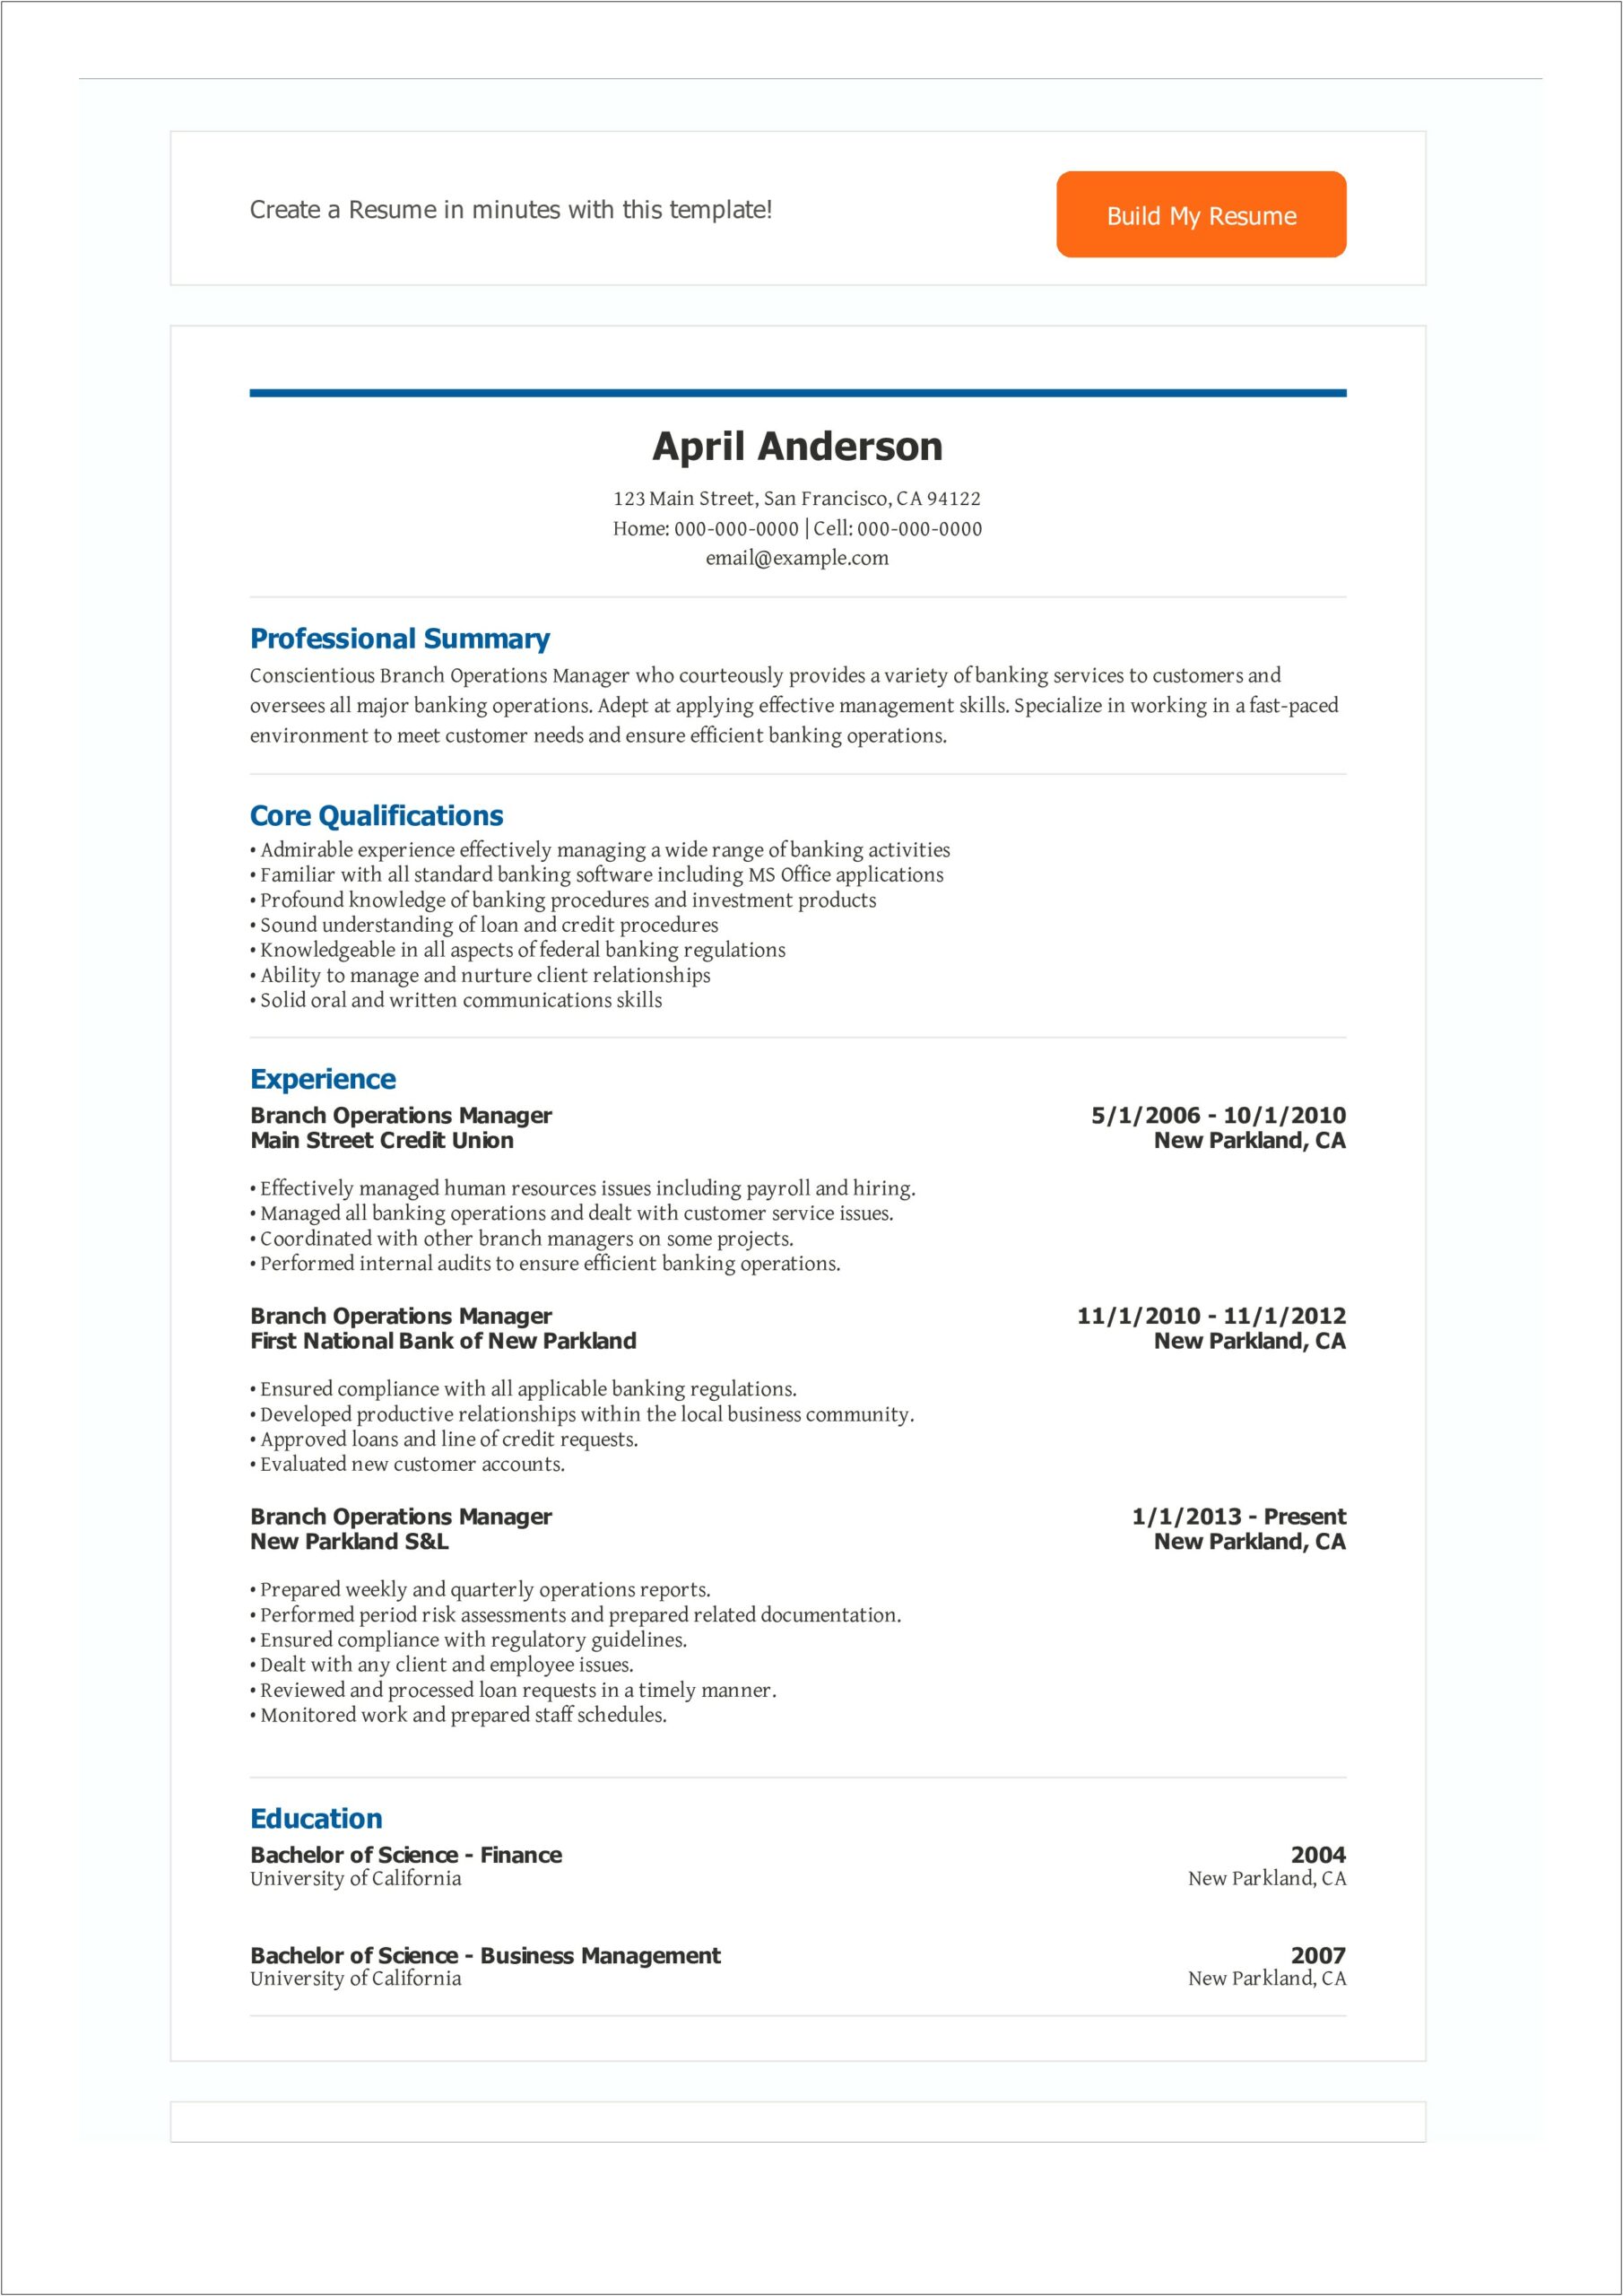 Sample Resume For Sales Operations Manager